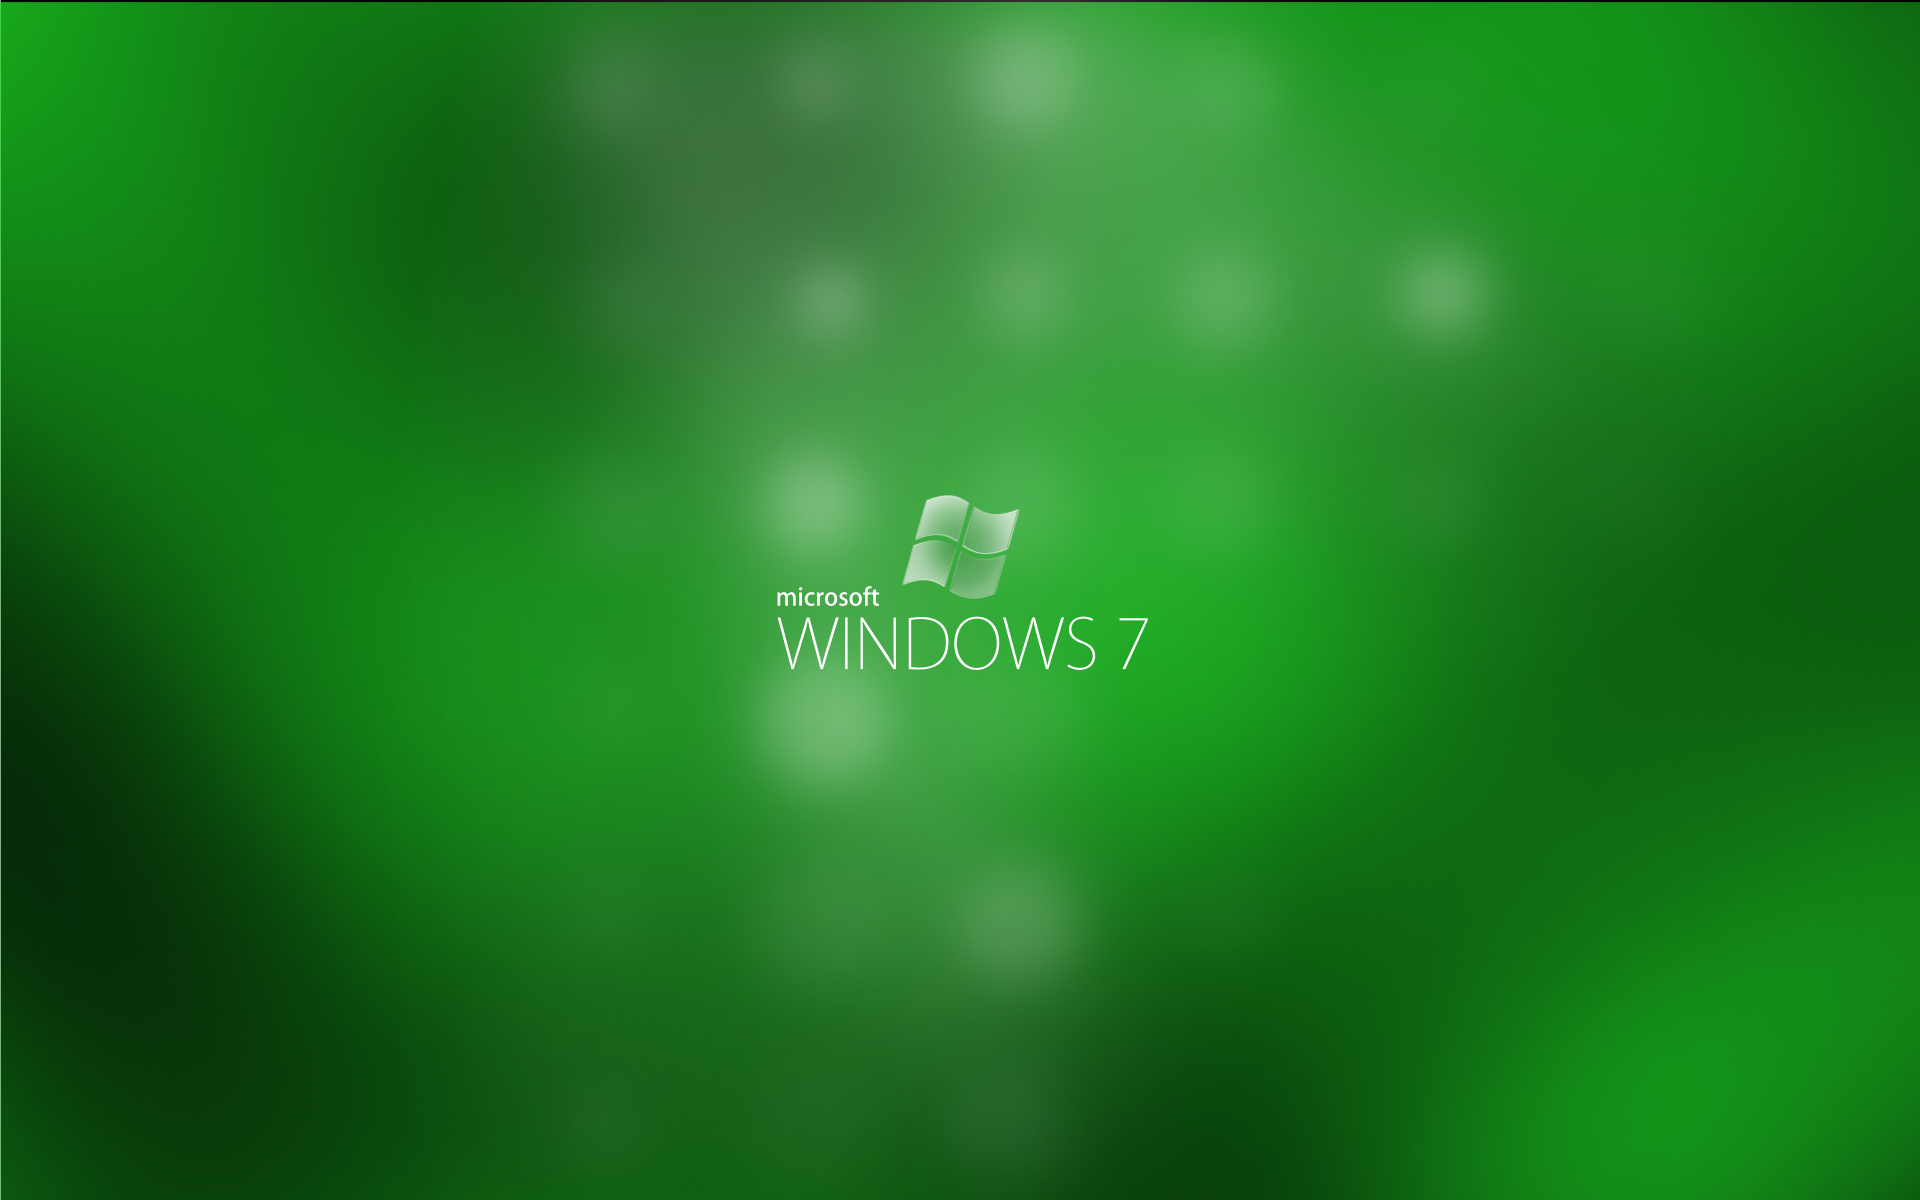 Windows 7 | Awesome Wallpapers